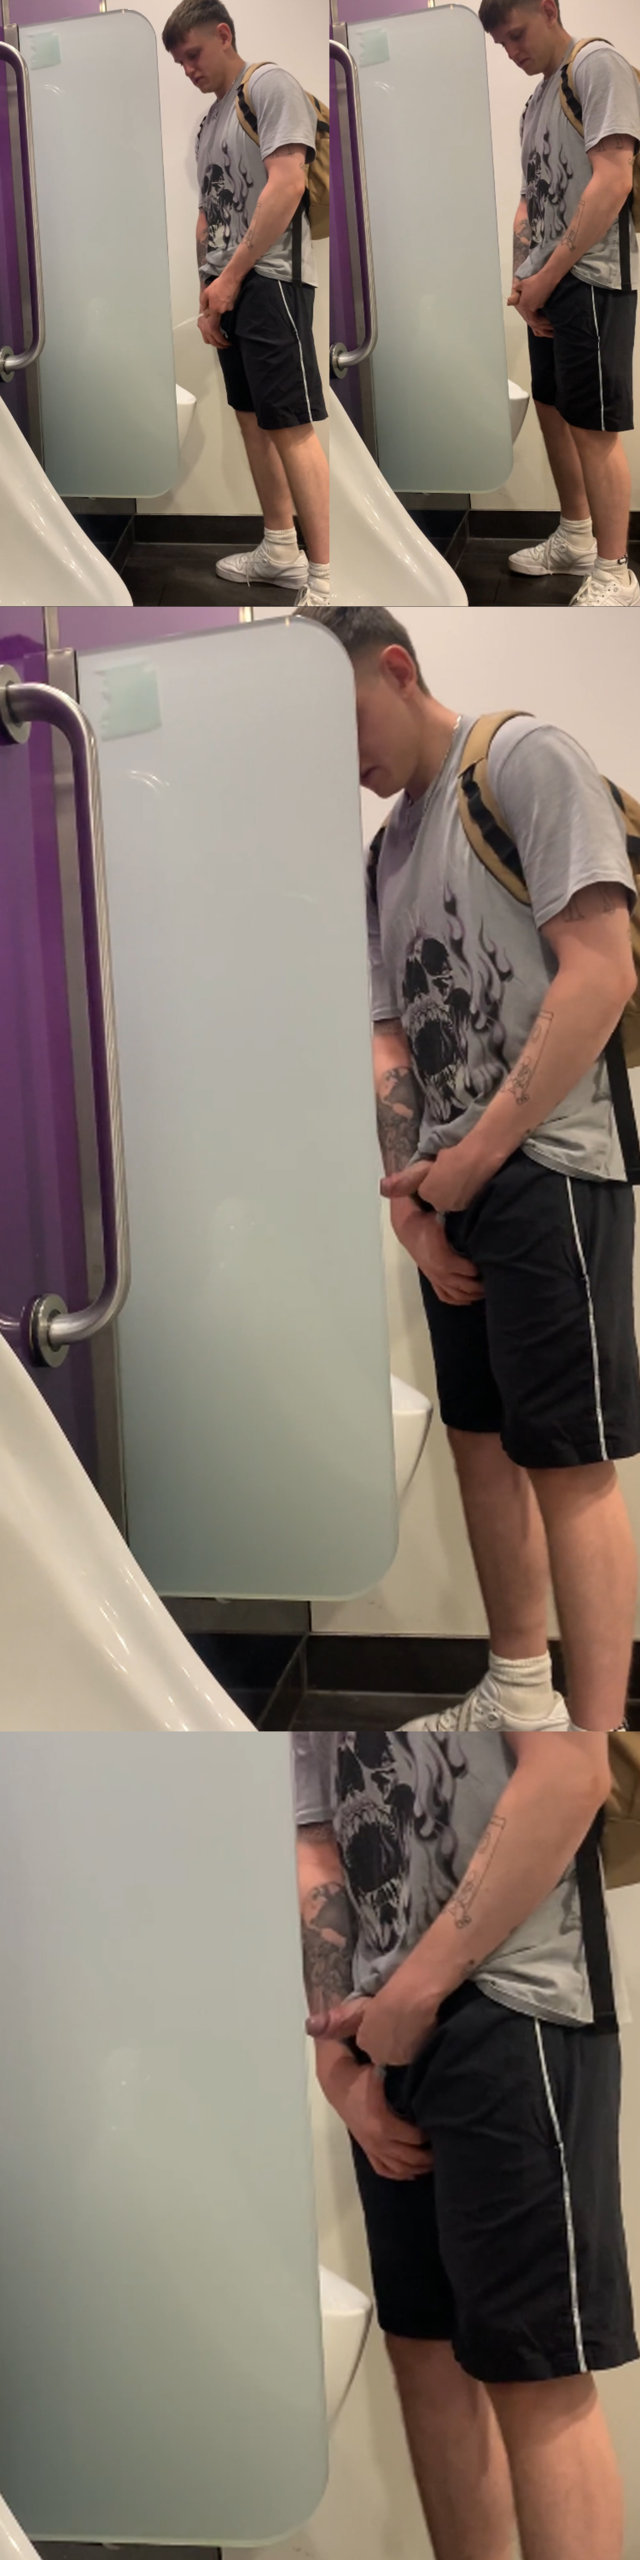 guy peeing at urinals and showing off his thick juicy uncut dick